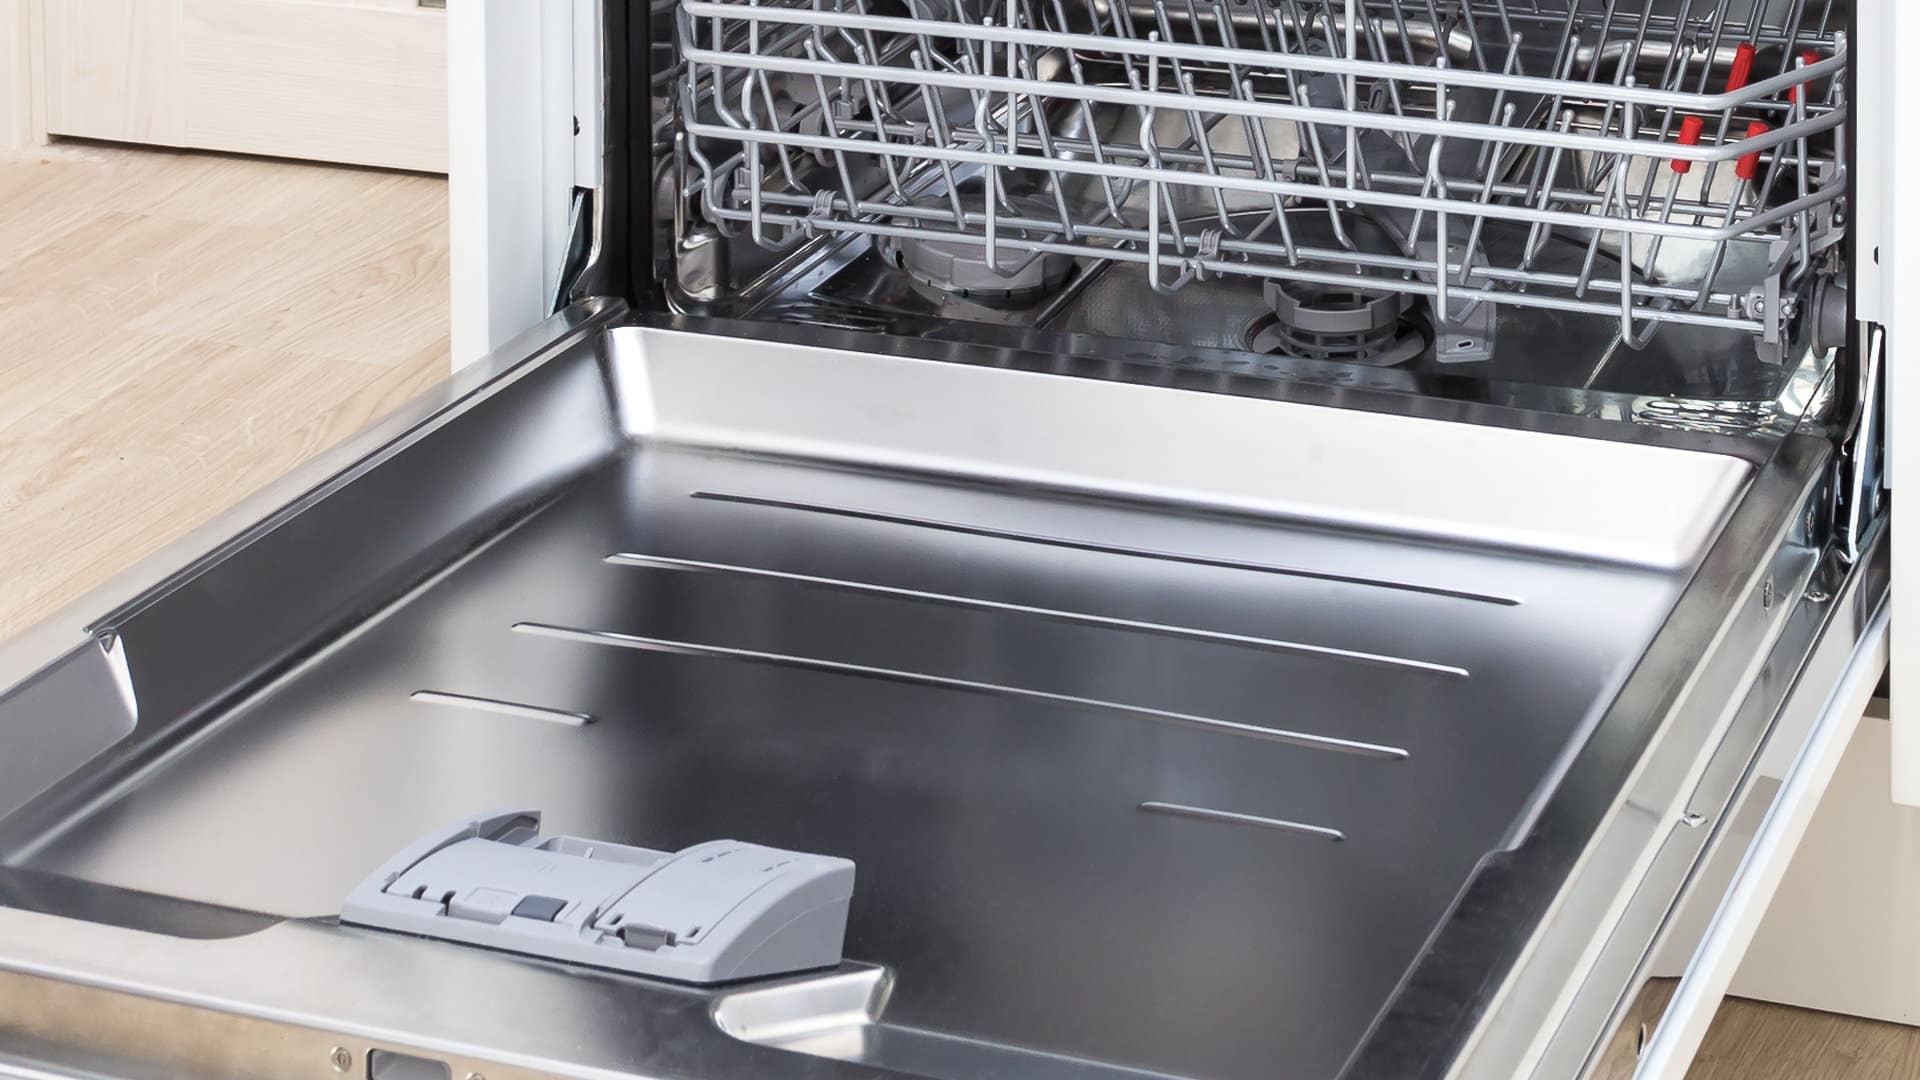 Featured image for “Bosch Dishwasher Not Draining? Here’s What to Do”